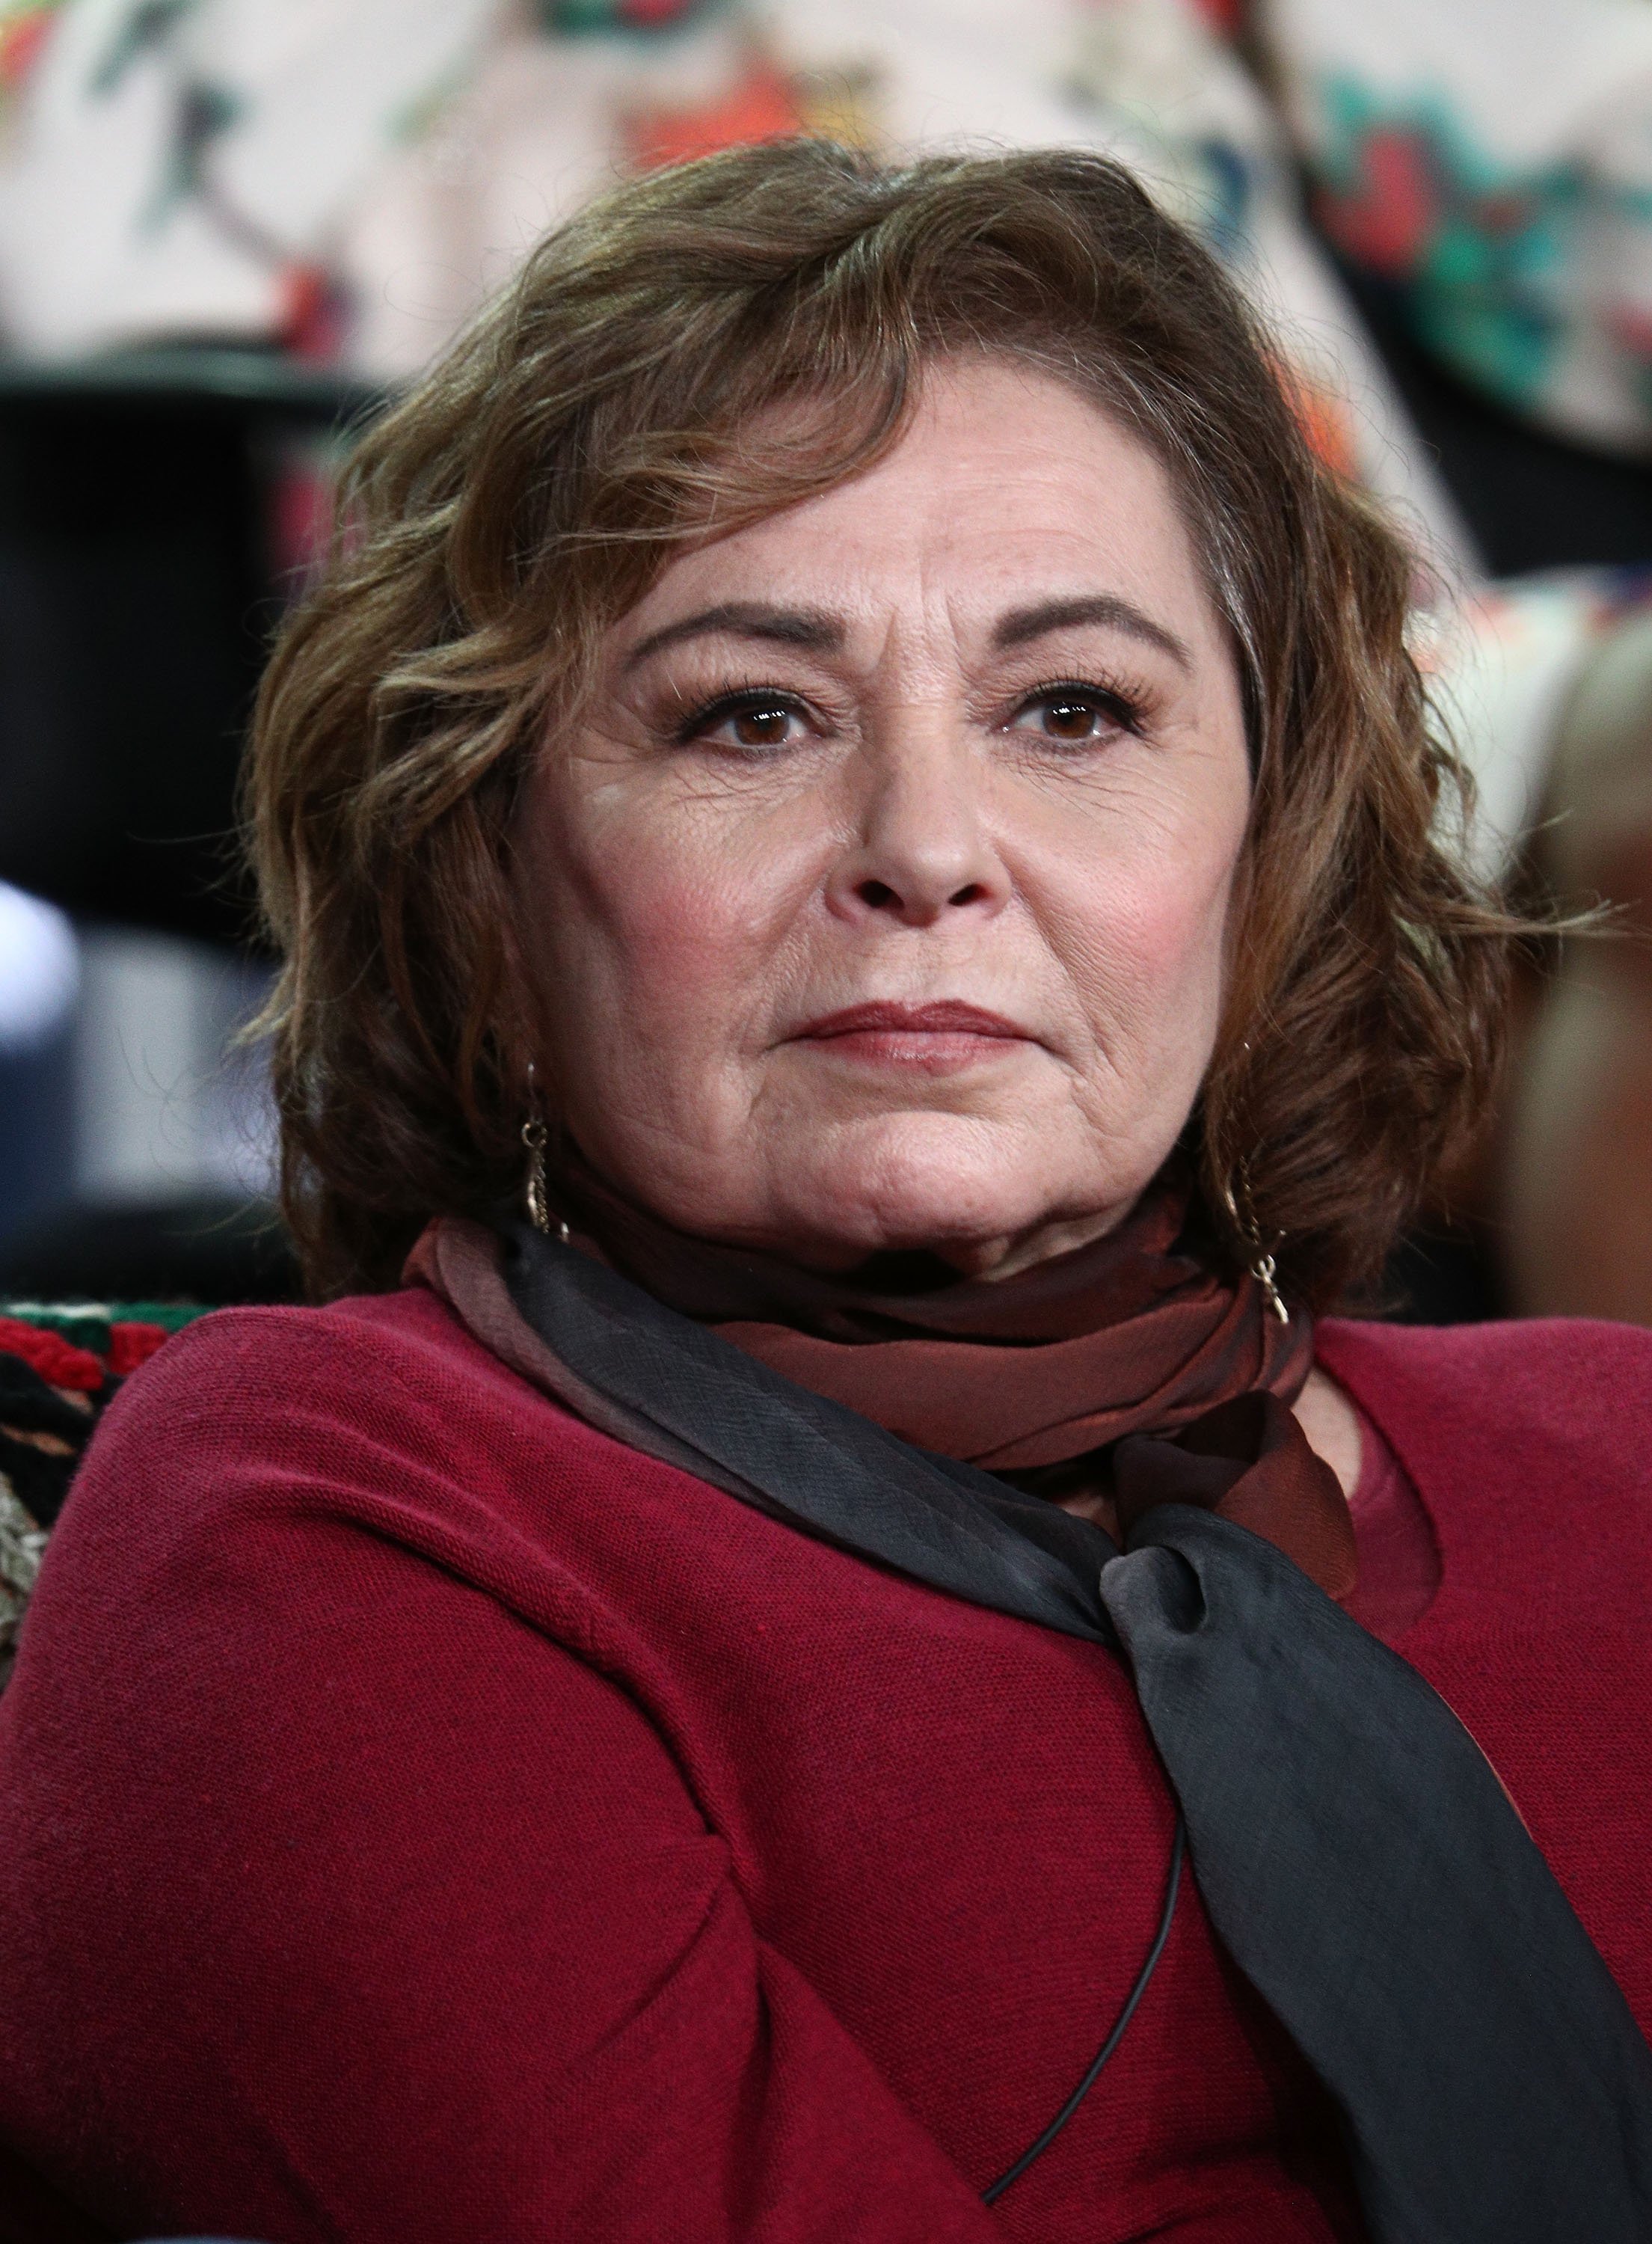 Roseanne Barr at the 2018 Winter Television Critics Association Press Tour in Pasadena, California | Photo: Getty Images